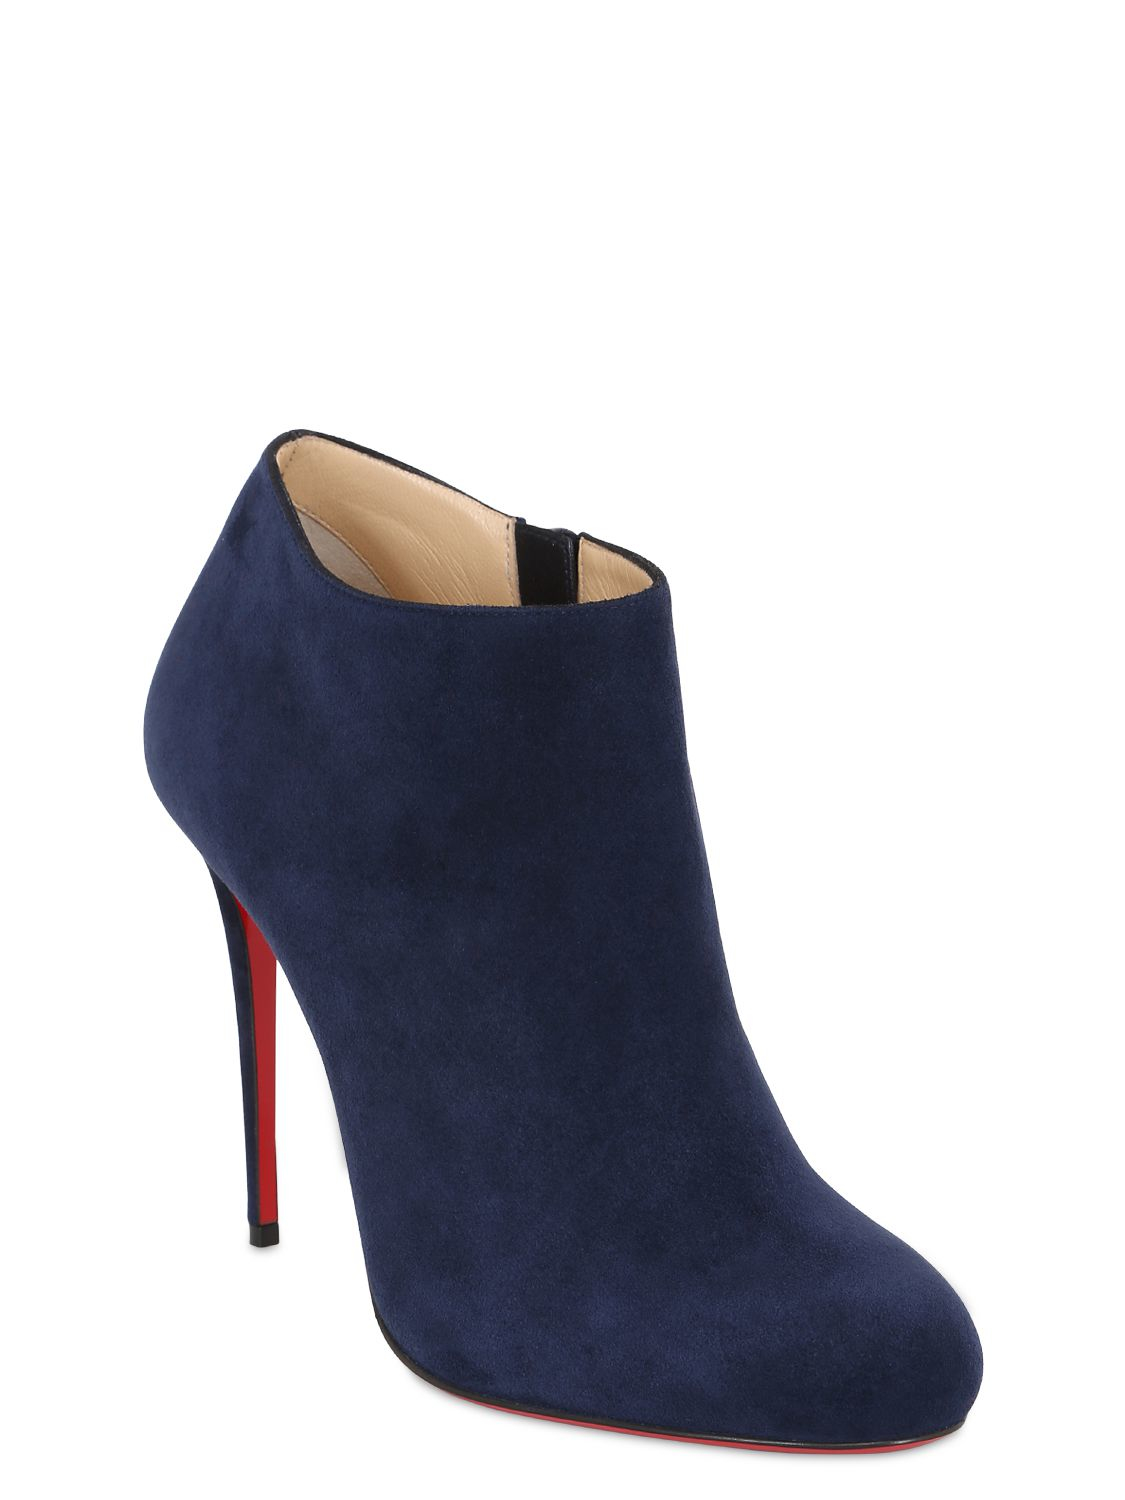 louboutin ankle boots uk